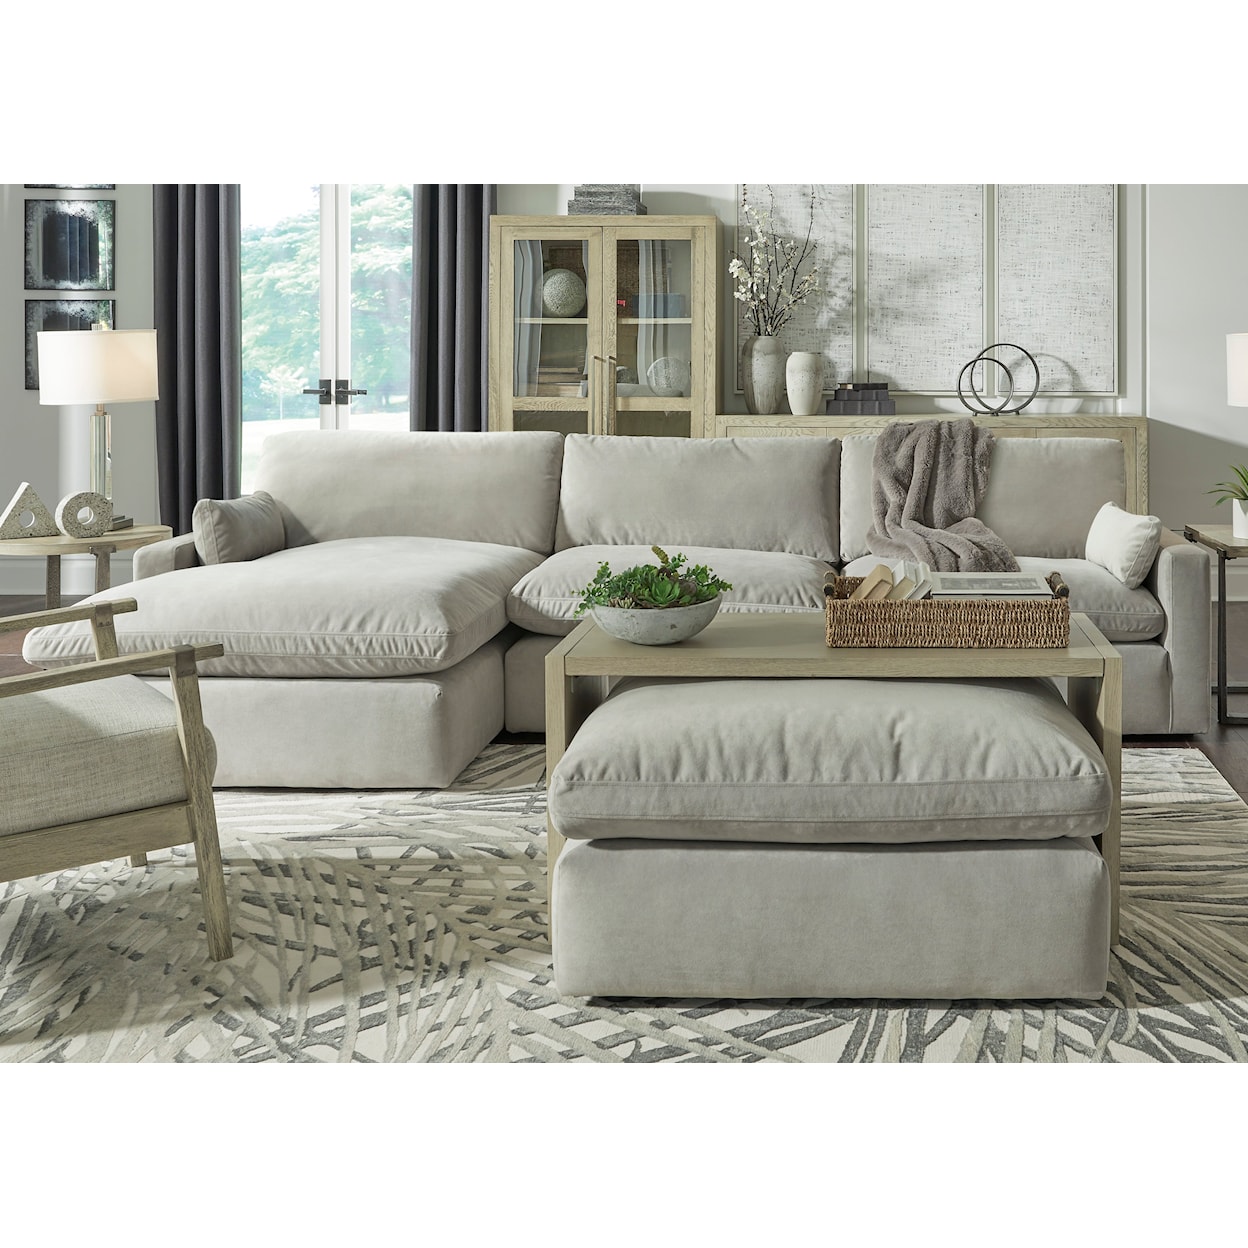 Signature Design by Ashley Furniture Sophie 3-Piece Sectional with Chaise